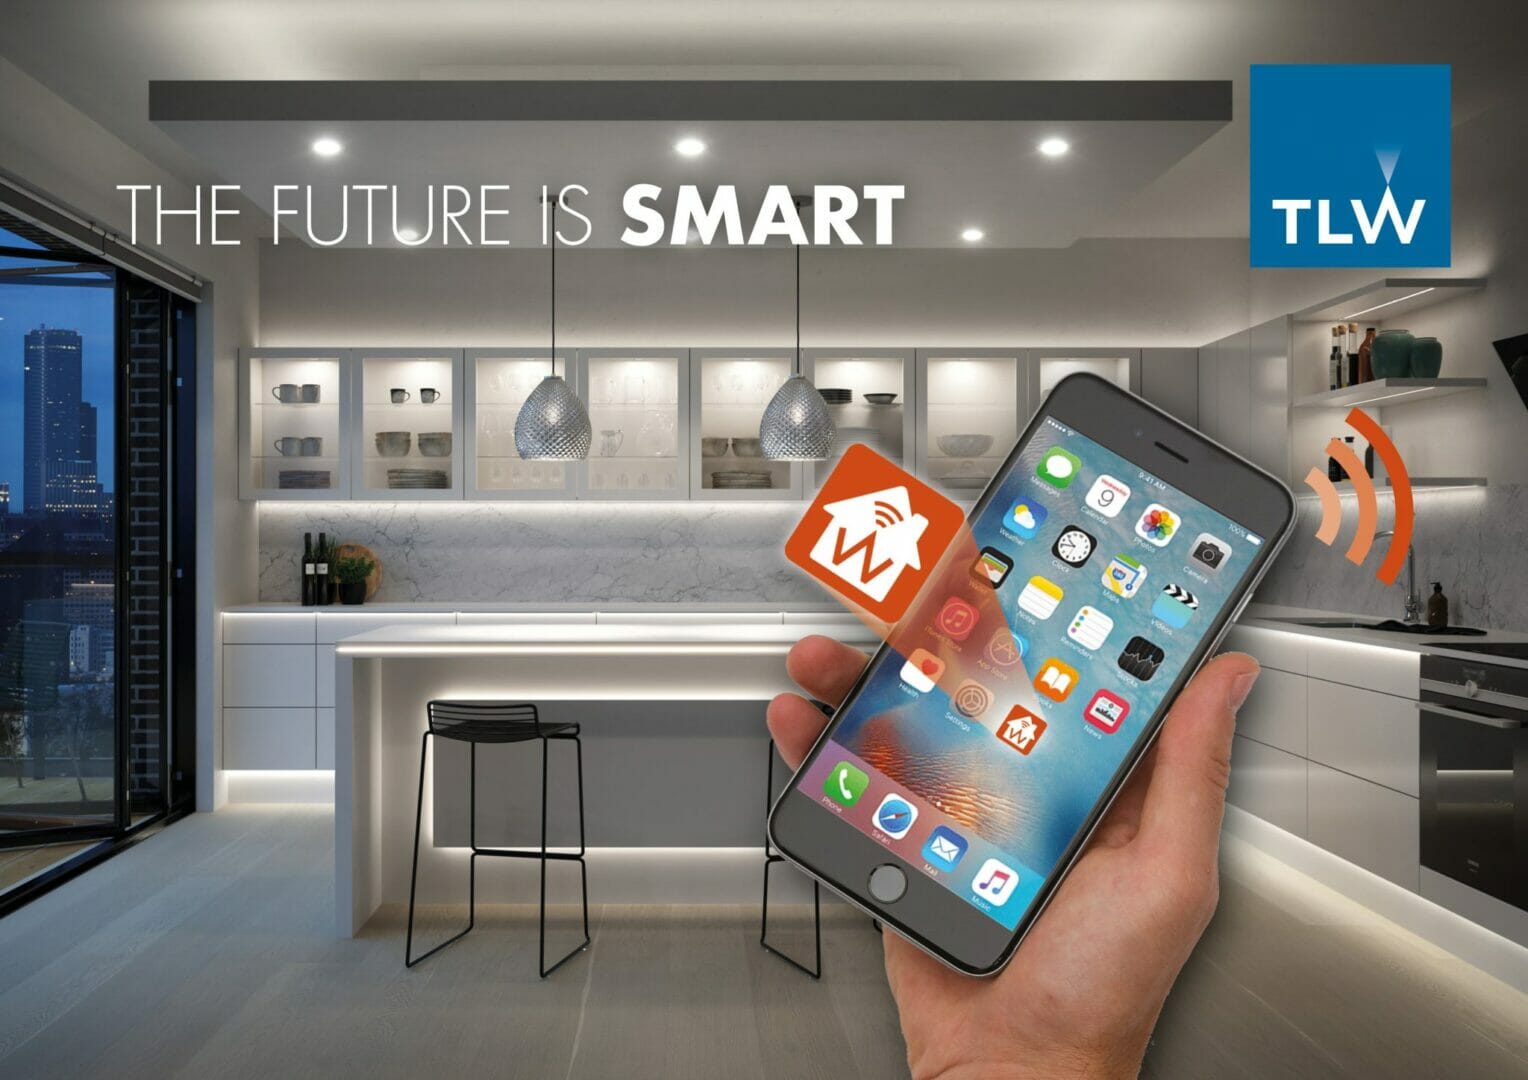 TLW become the first KBB Business to launch full Smart Home System